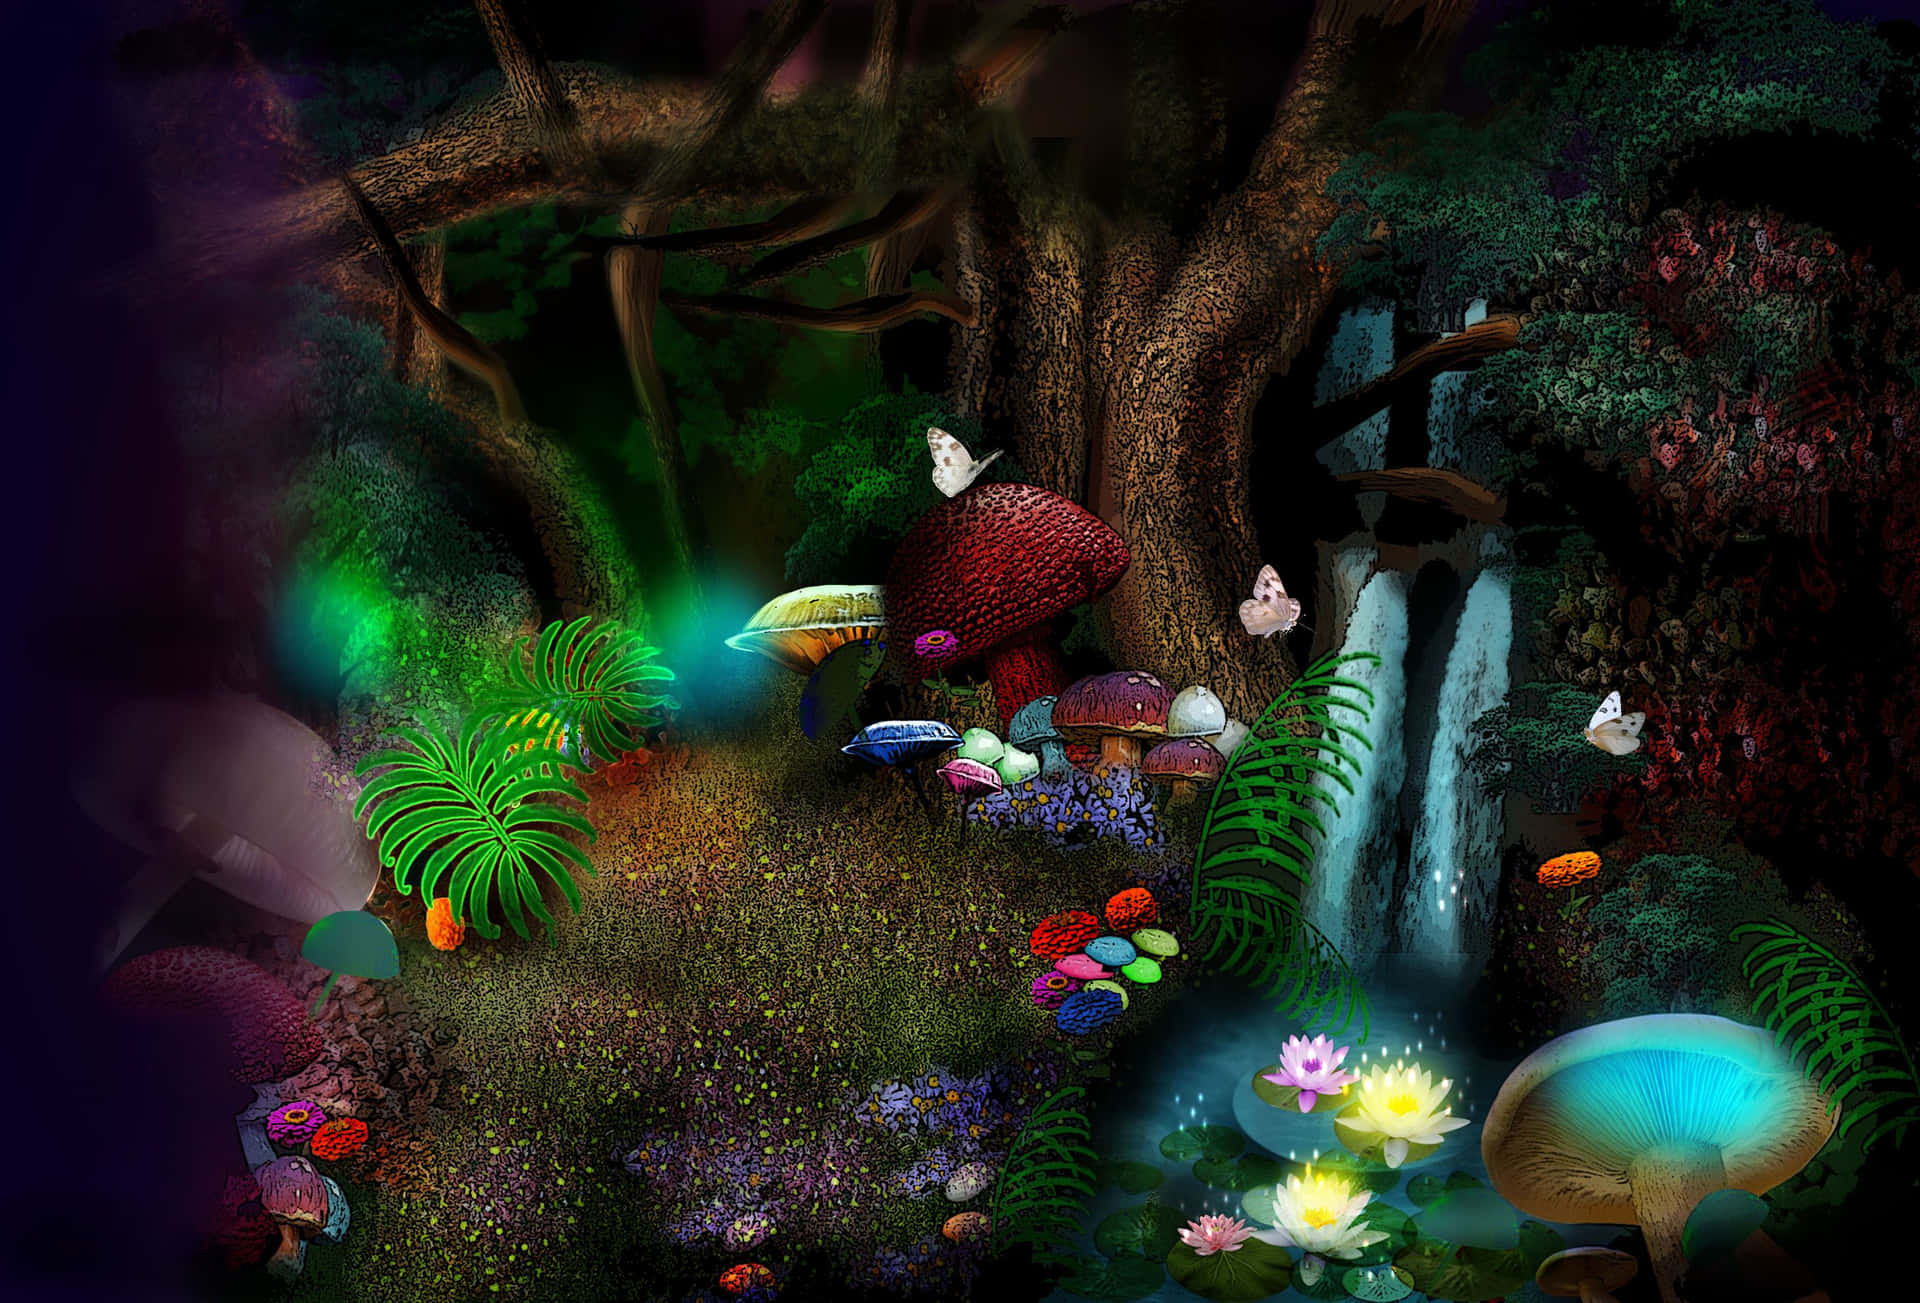 A Magical Enchanted Forest Scene